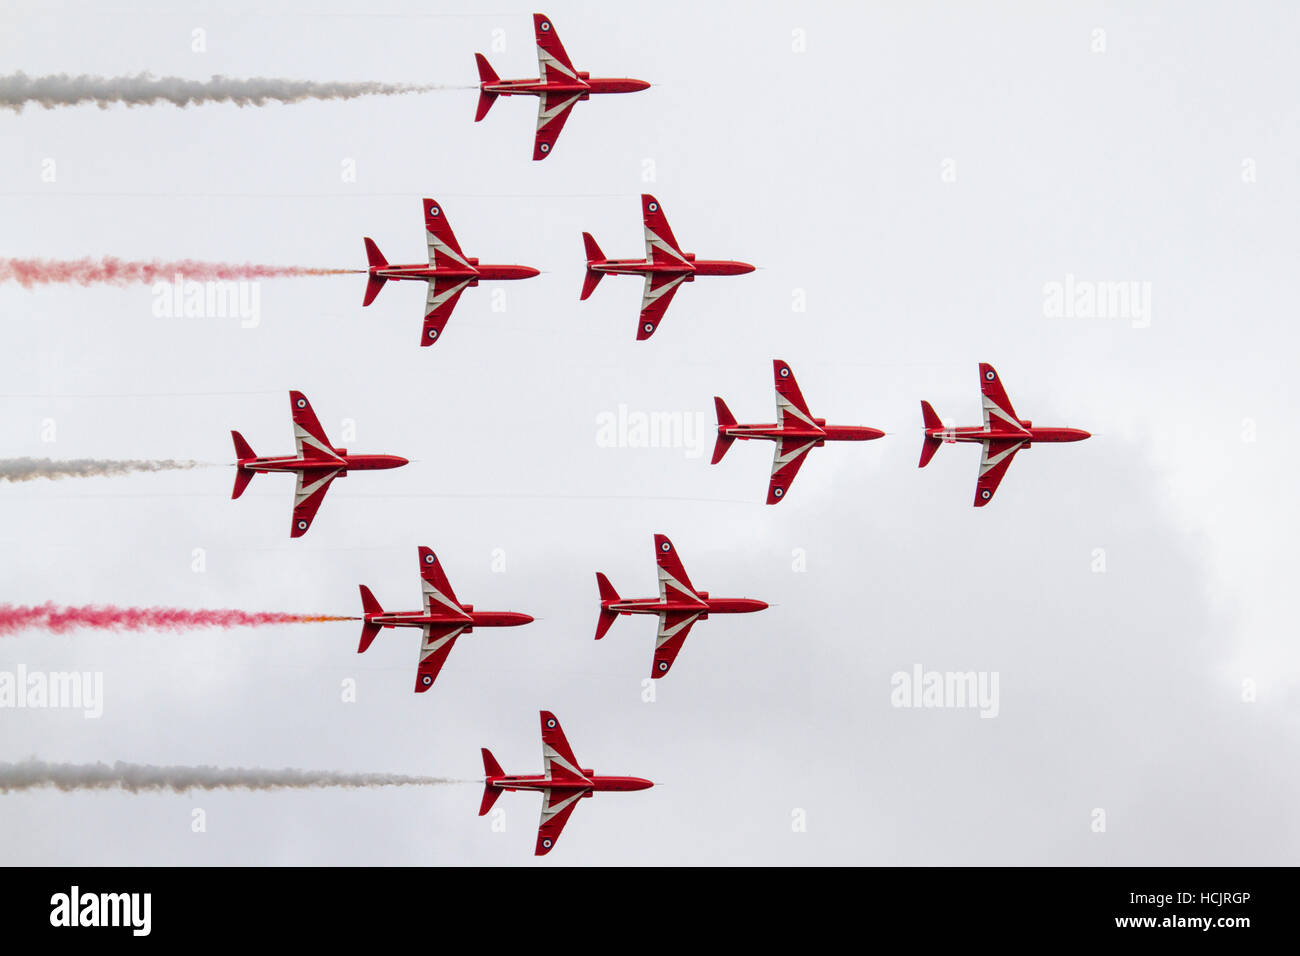 Red Arrows aviation display at Dunsfold Air Show in Surrey England in 2016 Stock Photo